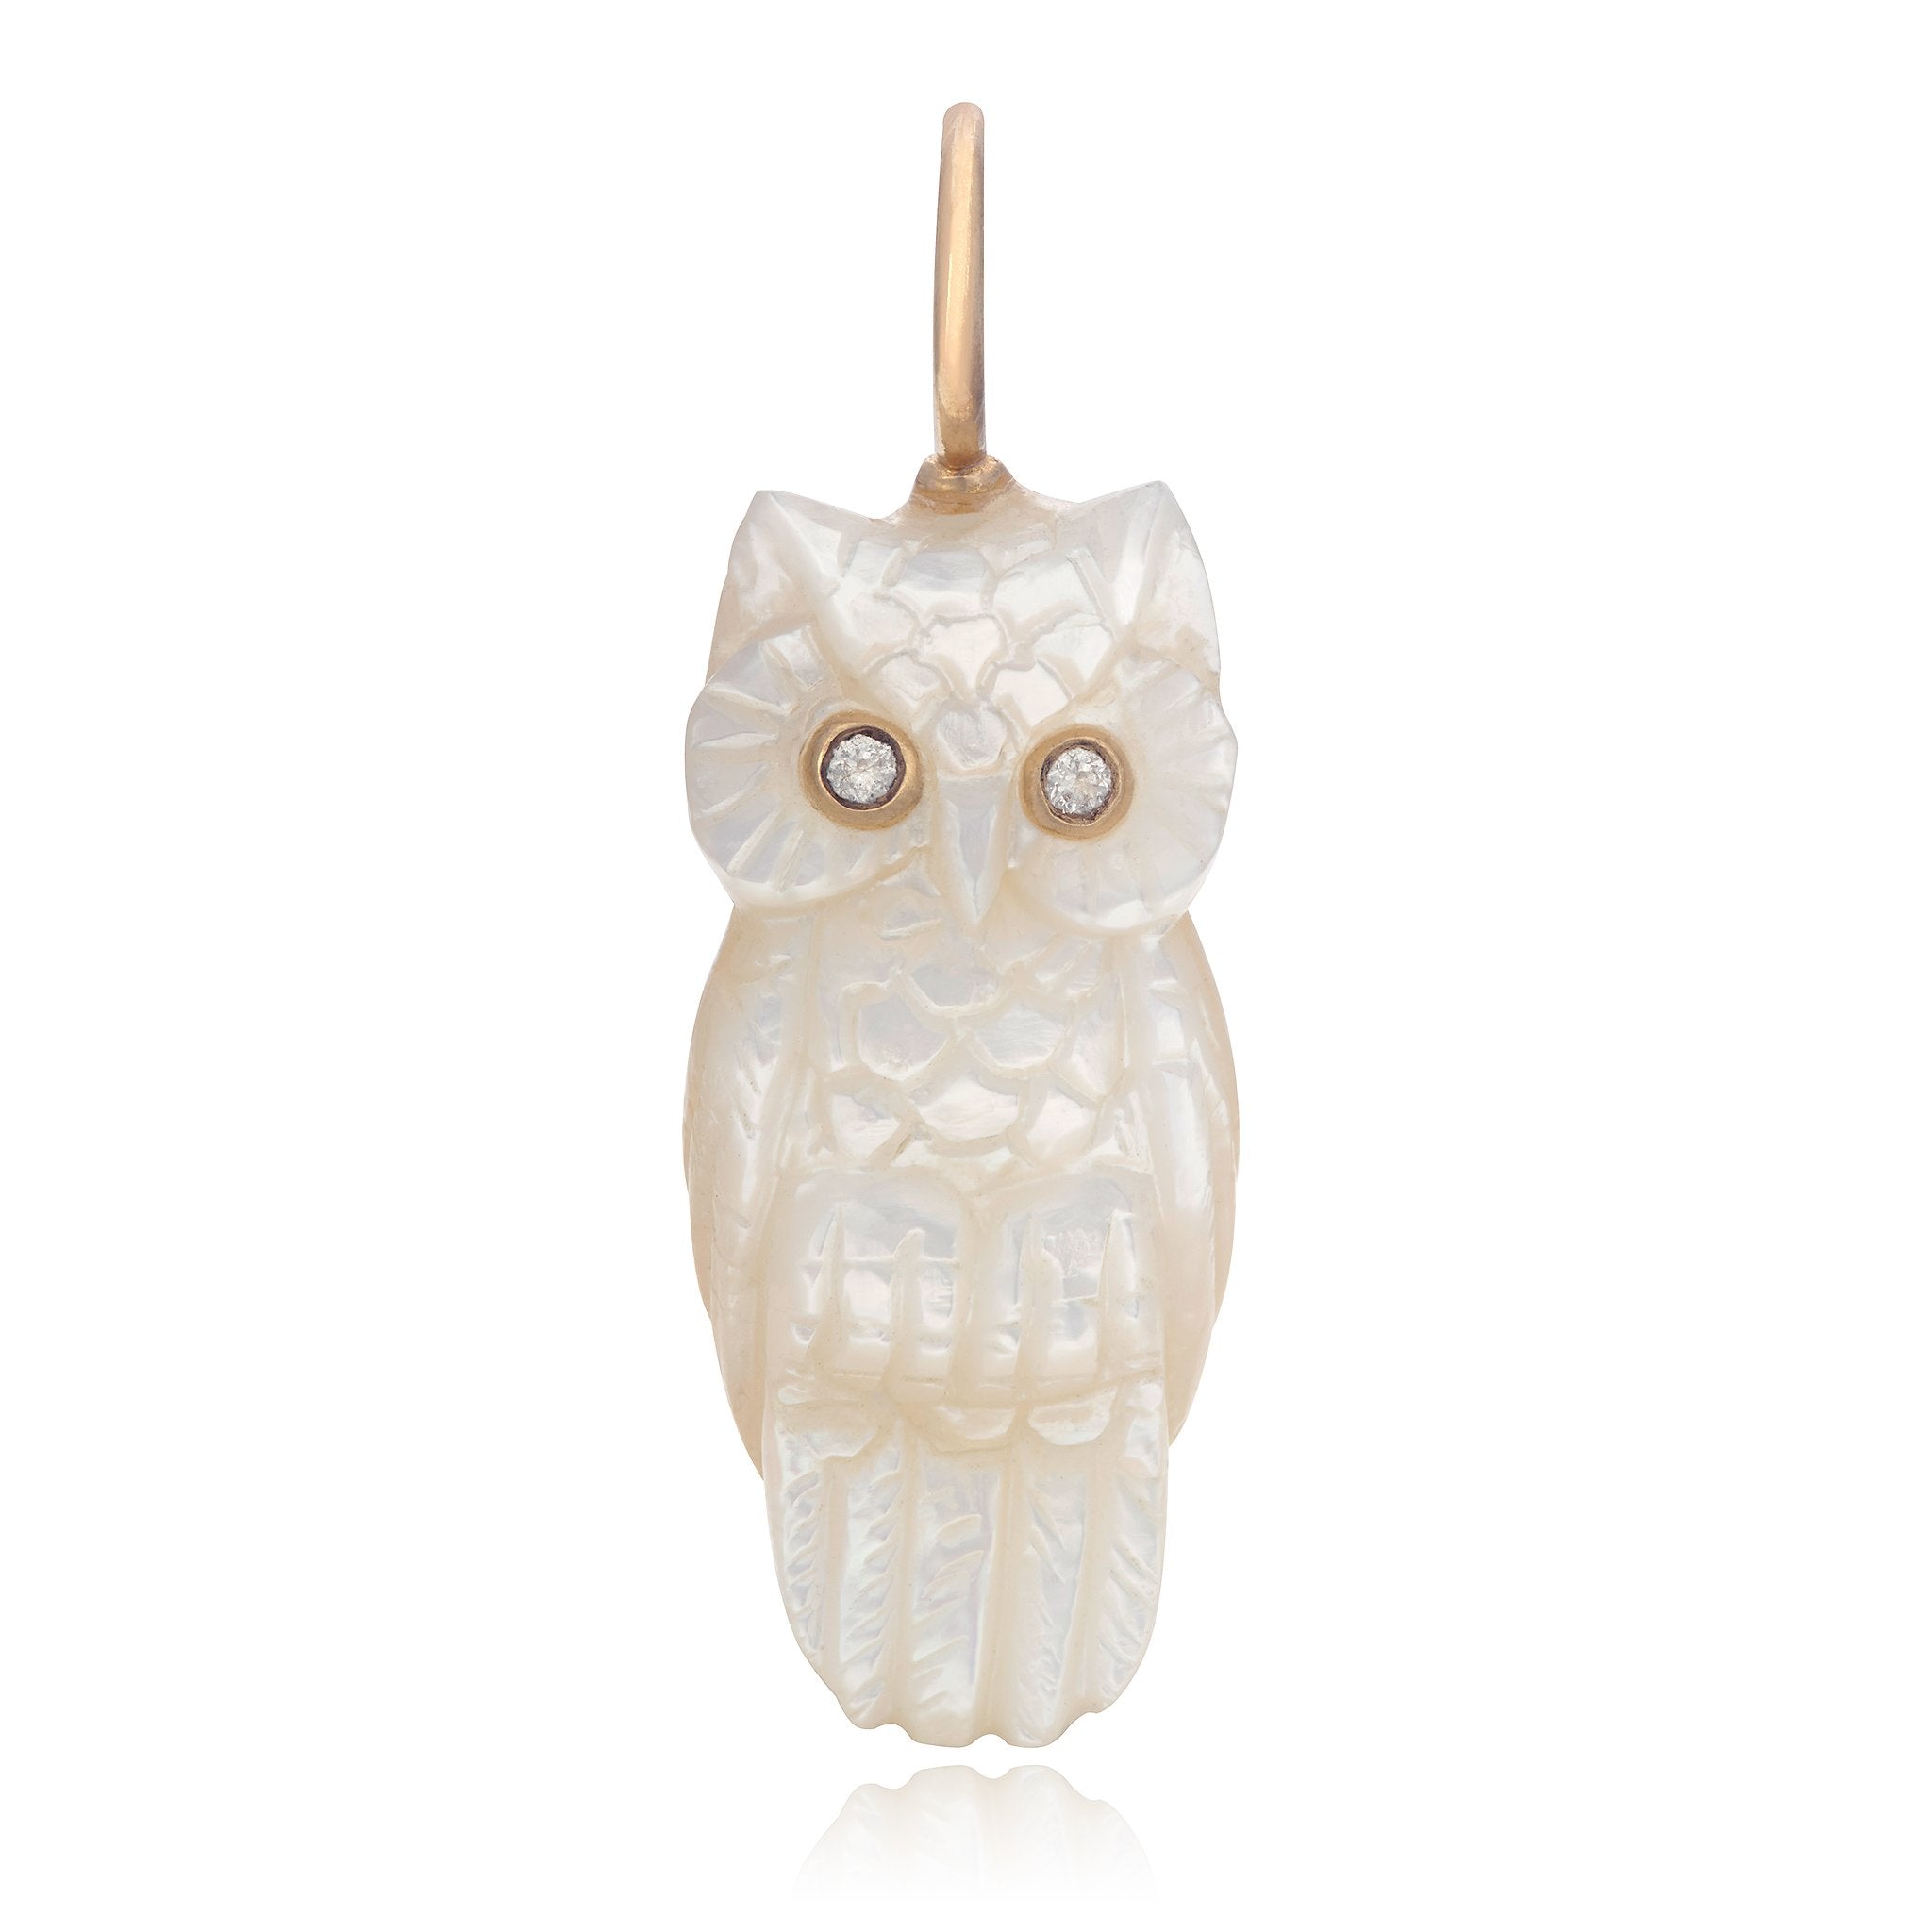 Hand Carved Owl Charm